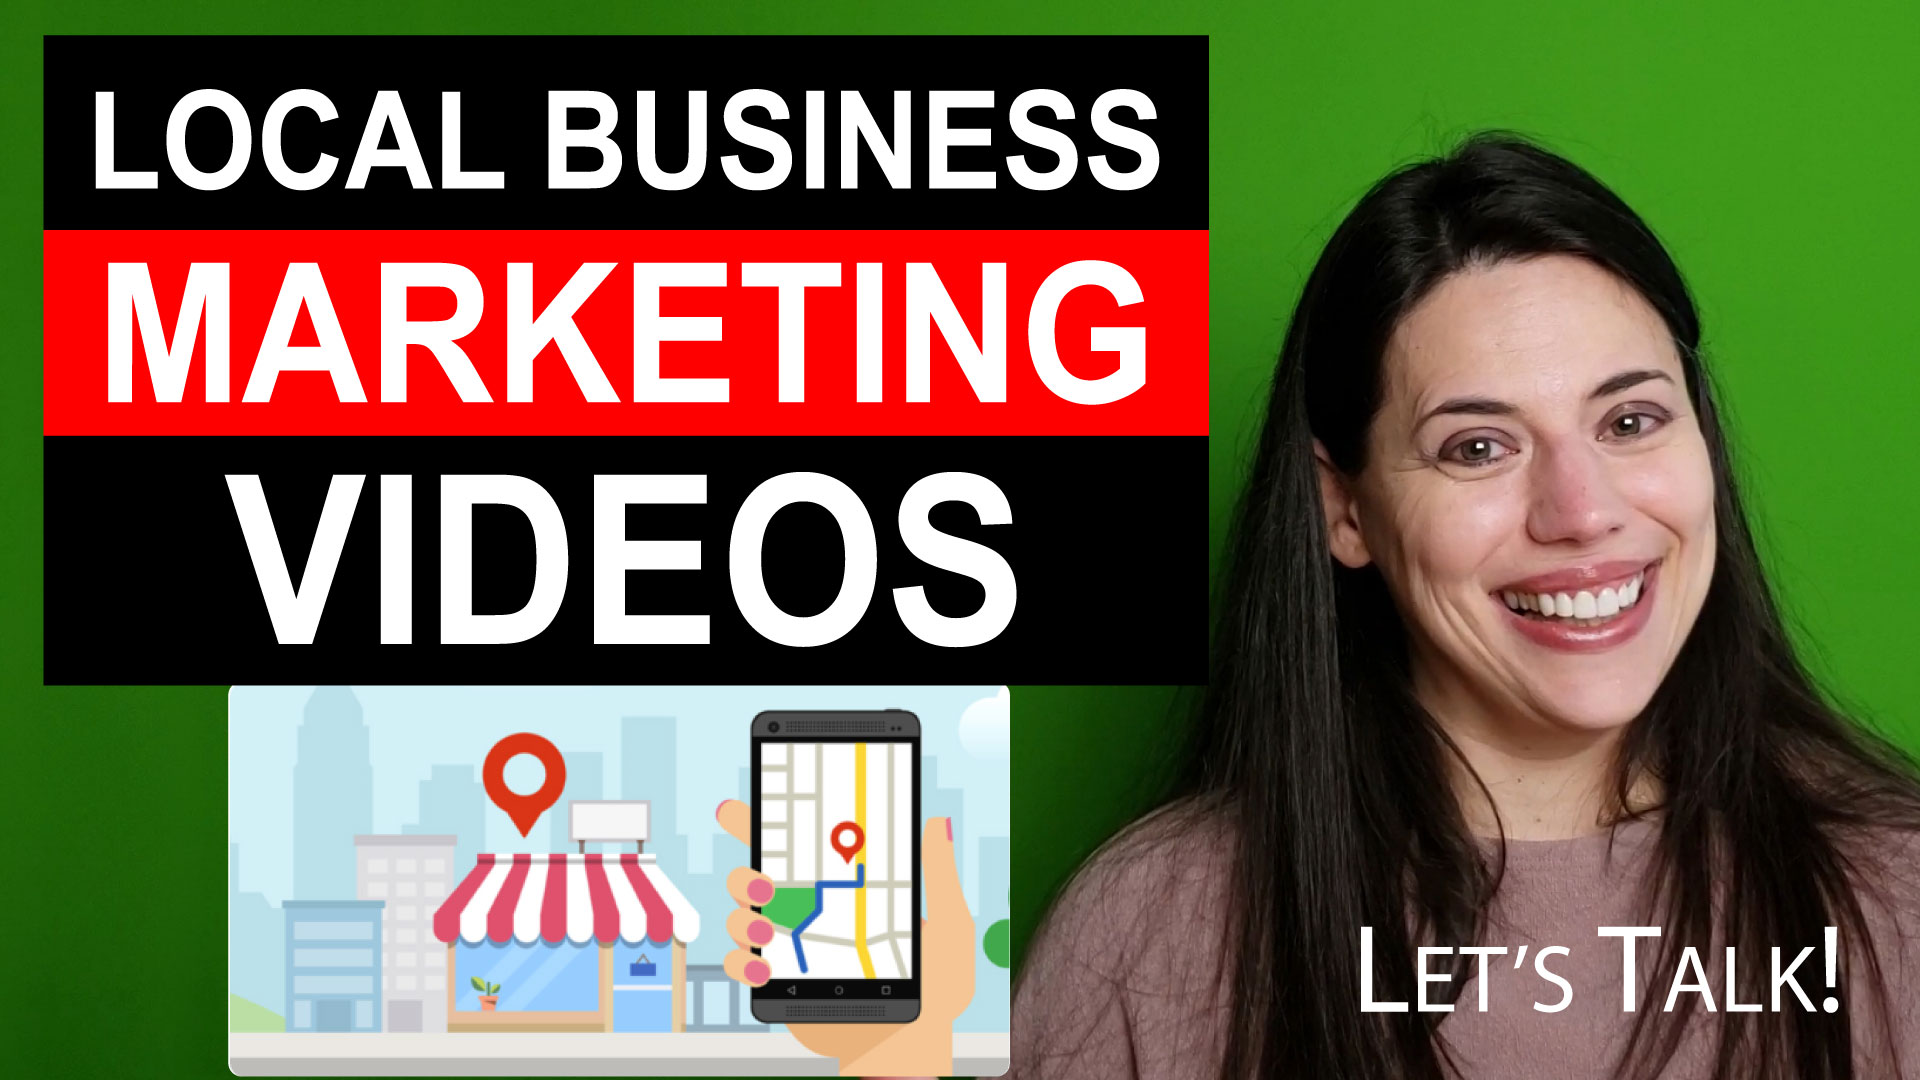 Market Your Local Business Online